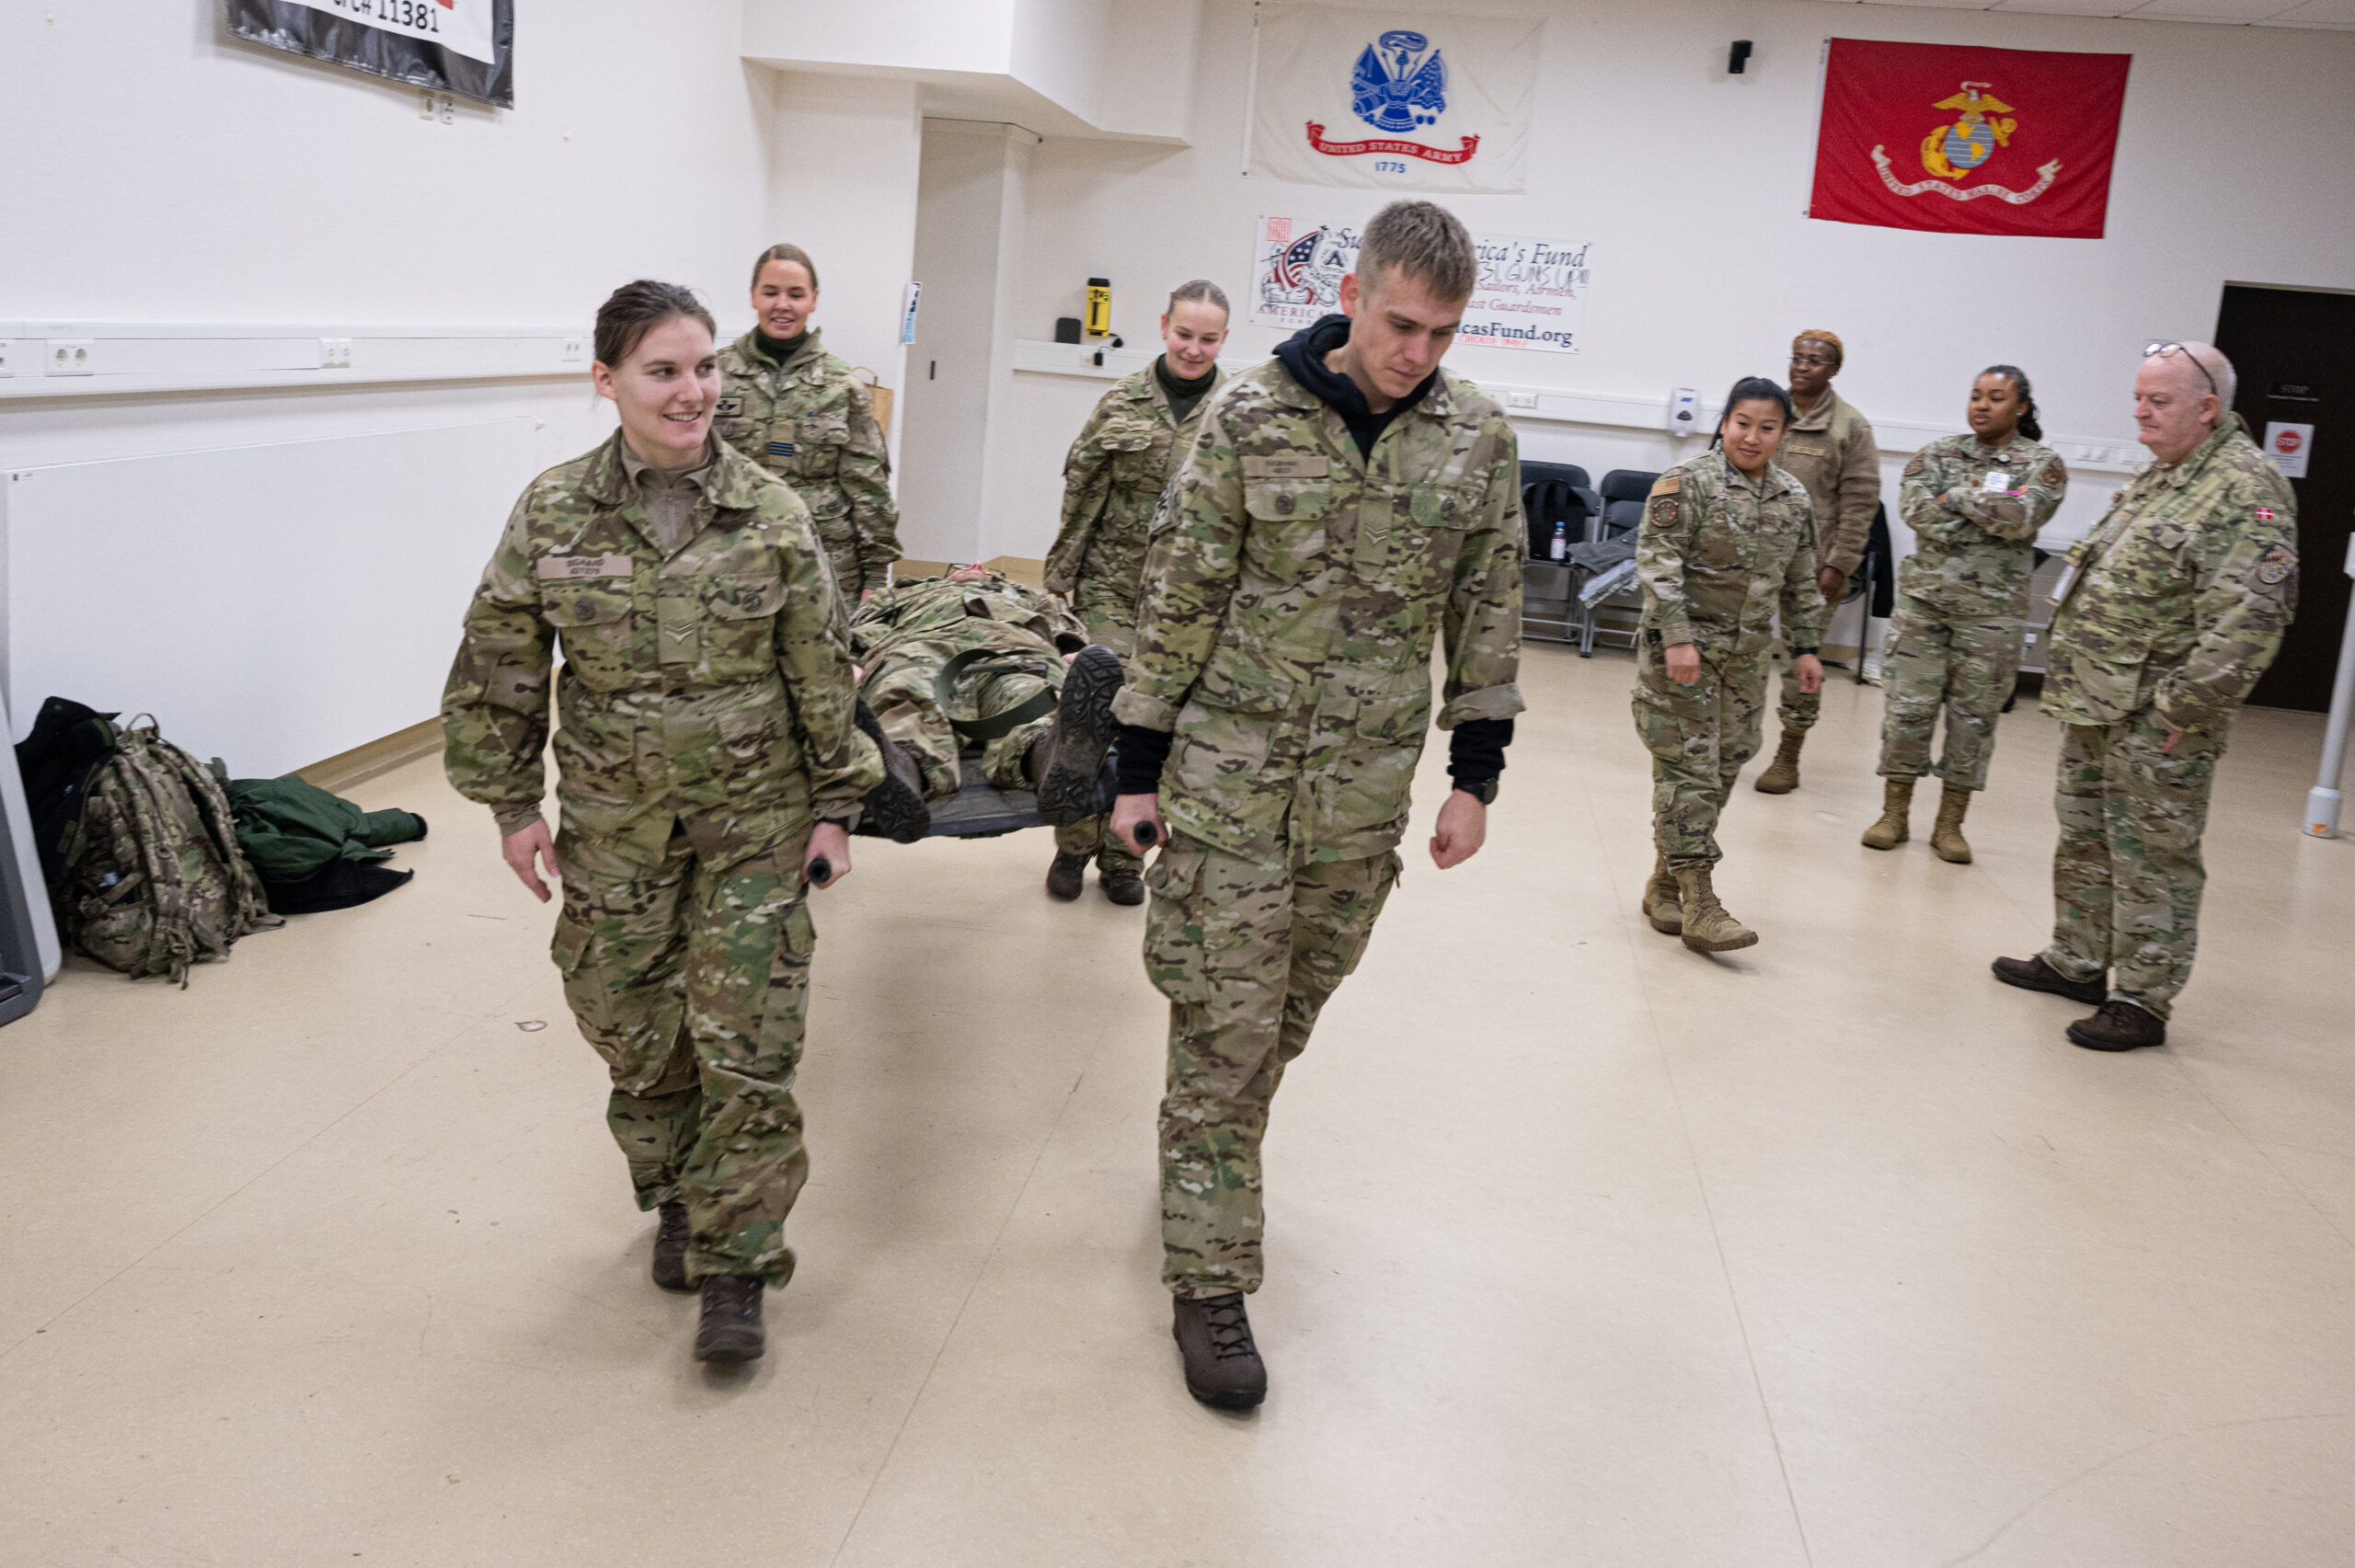 Danish medical personnel perform a litter carry as part of a demonstration at Ramstein Air Base, Germany, Nov. 29, 2023. Medical personnel from Bulgaria, Denmark, Serbia and the U.S. traveled around the Kaiserslautern Military Community where they exchanged knowledge to form best practices in their field. (U.S. Air Force photo by Senior Airman Thomas Karol)